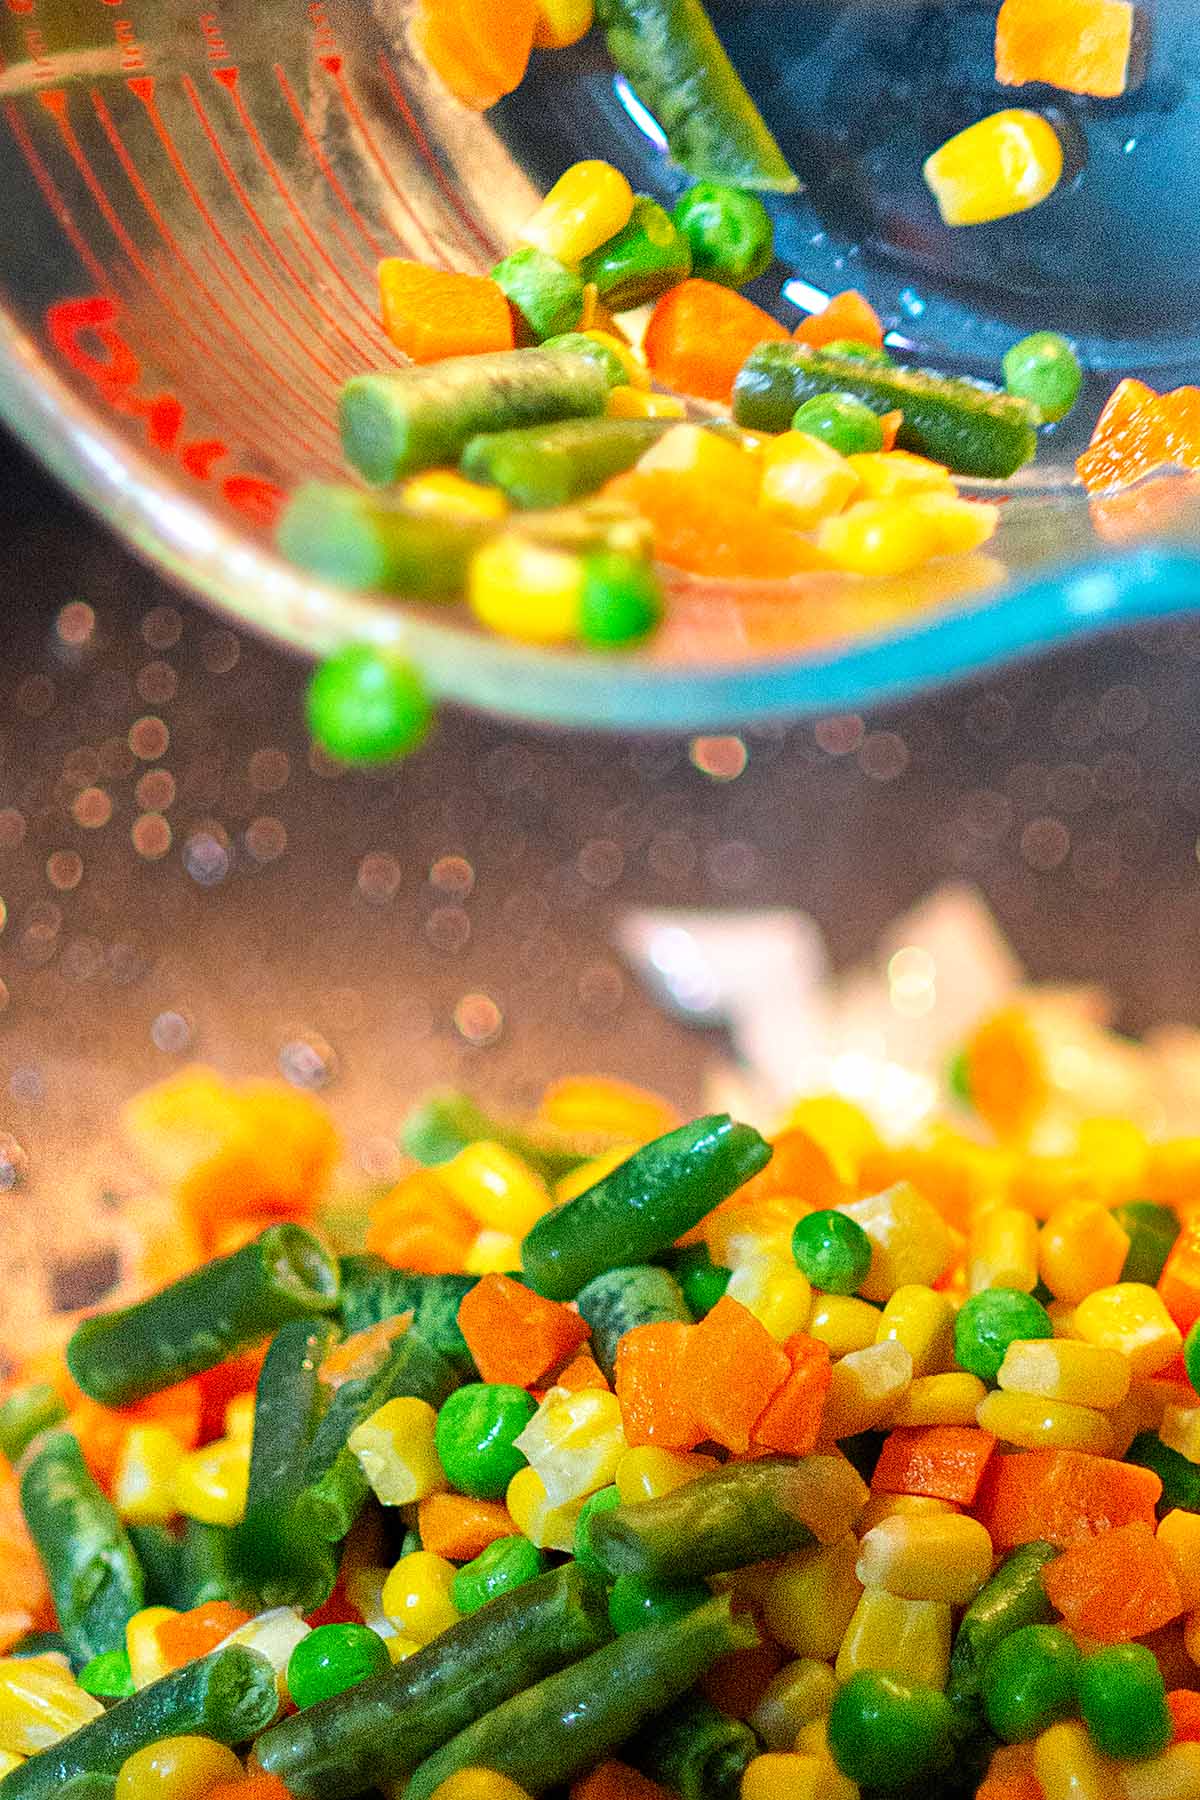 Mixed vegetables are poured into a wok.